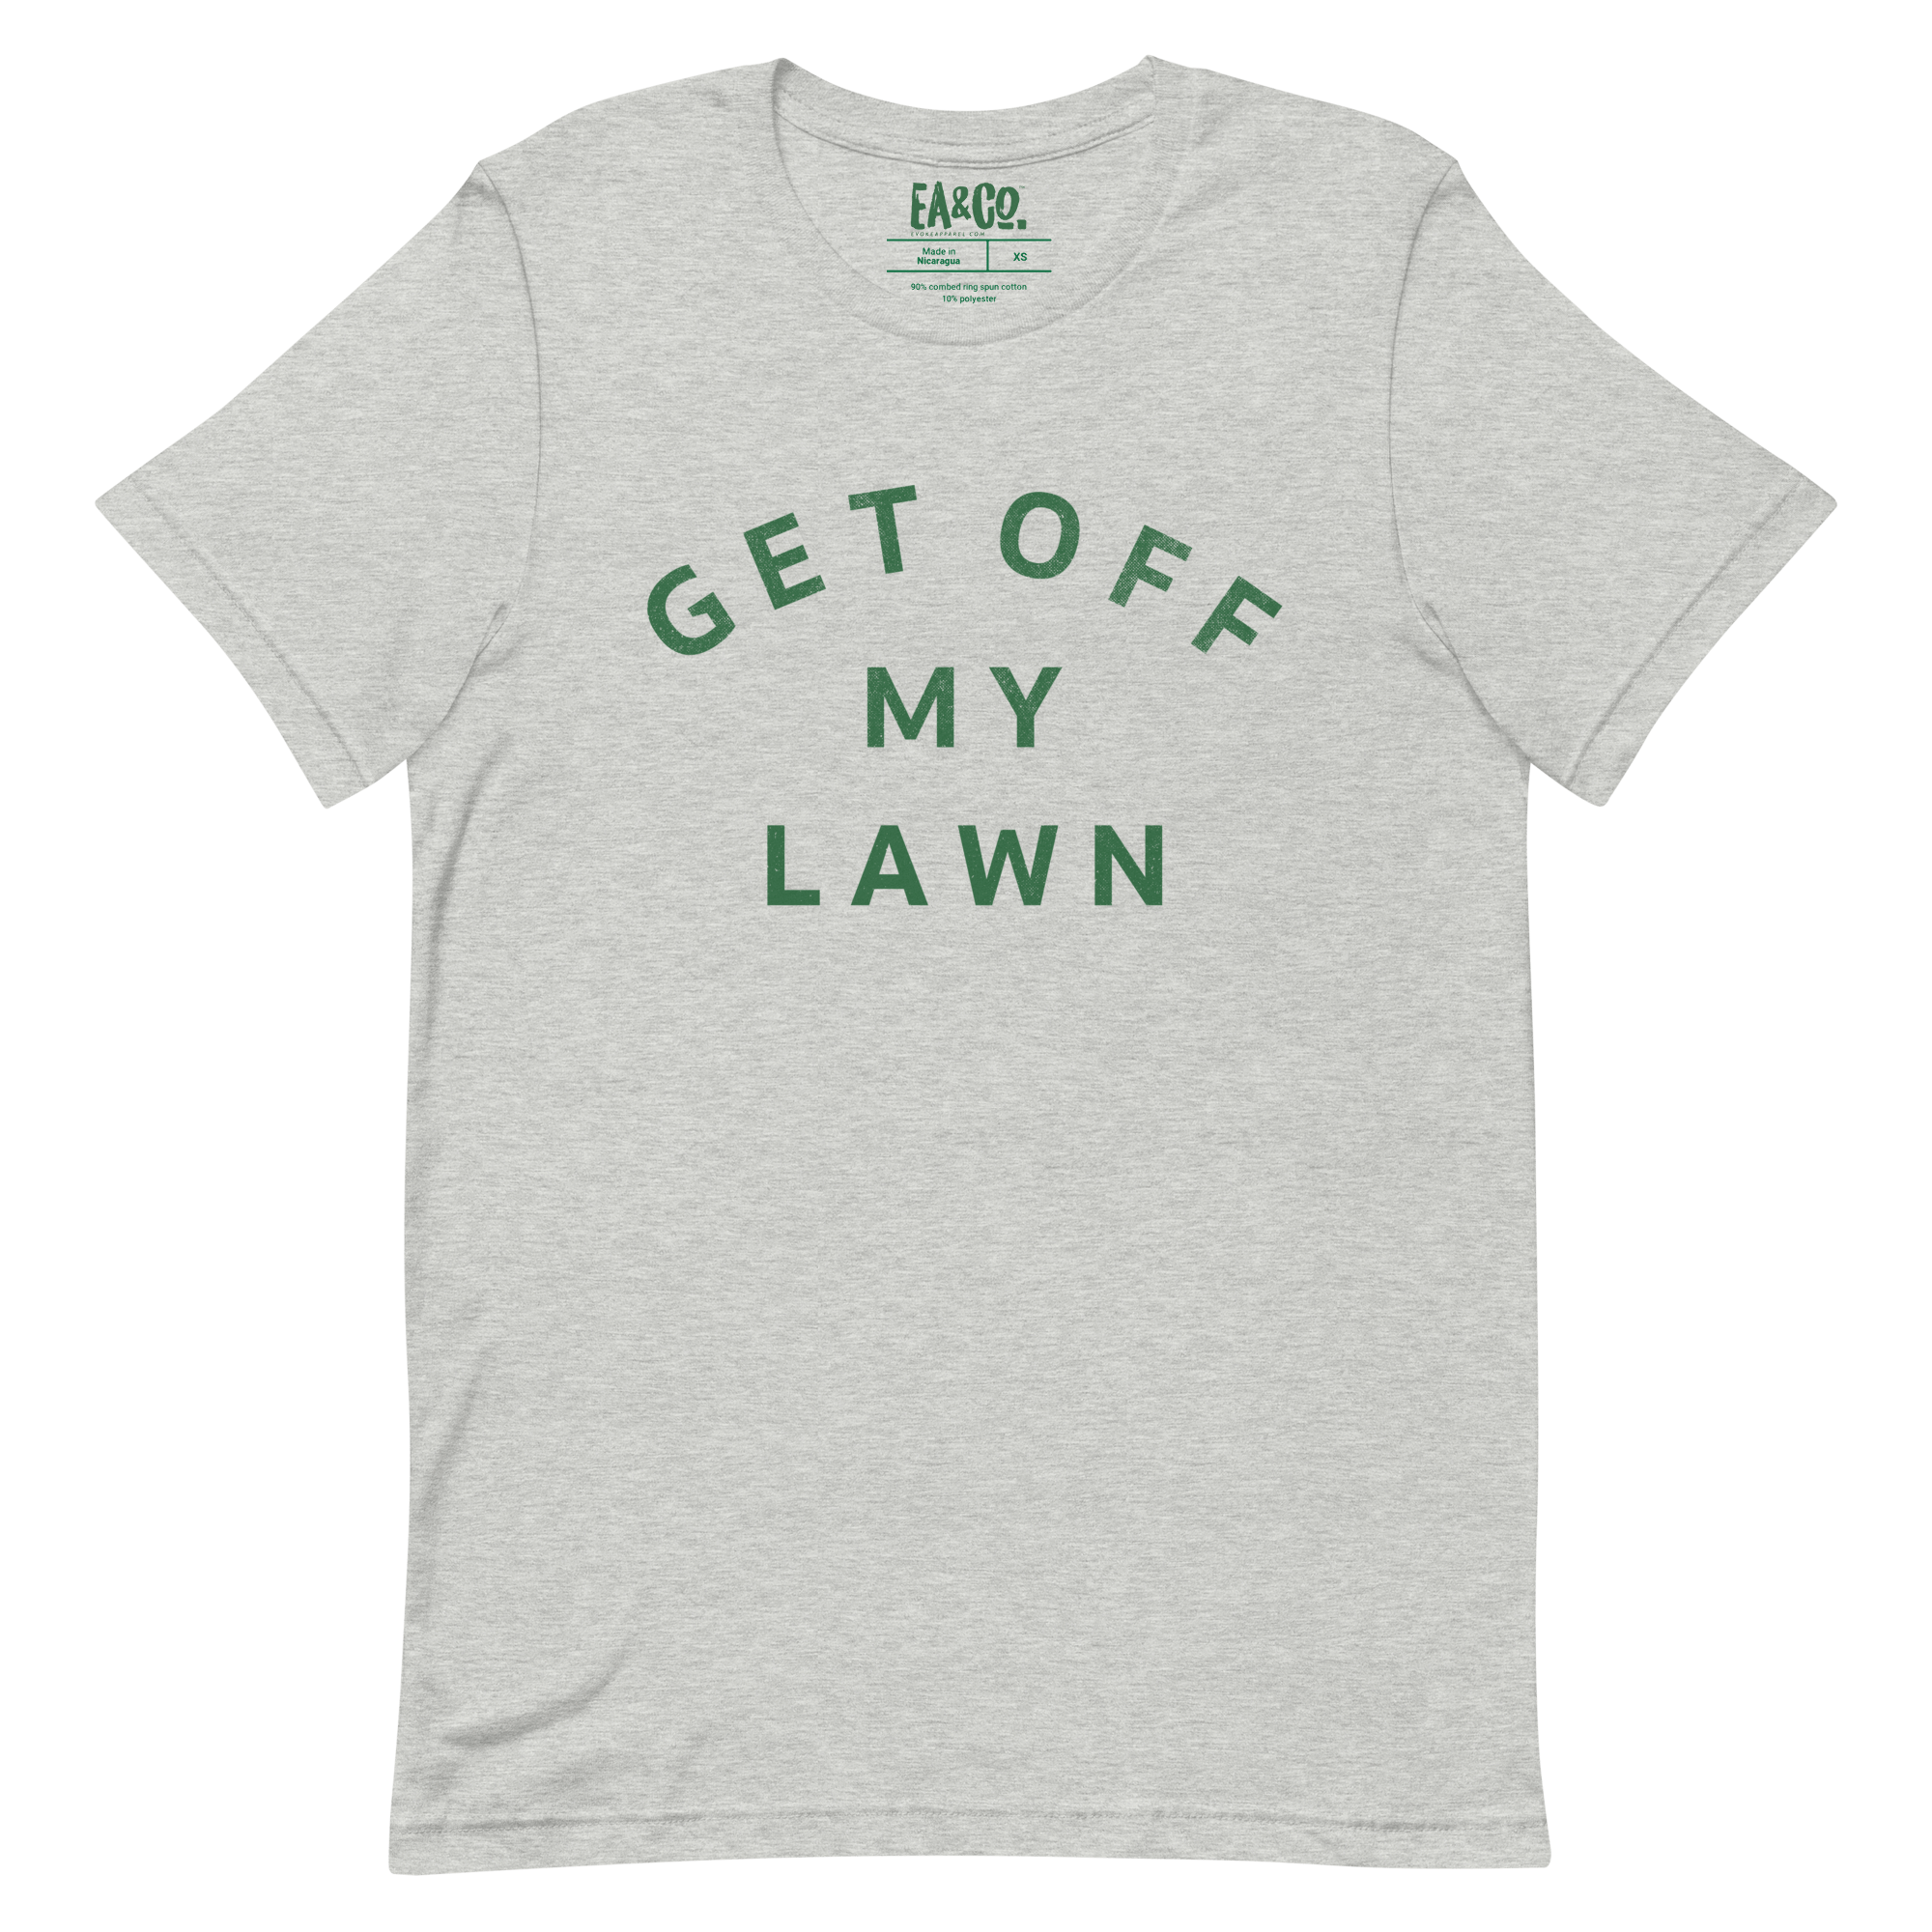 Get Off My Lawn Sarcastic Snarky Unisex Tee | Evoke Apparel